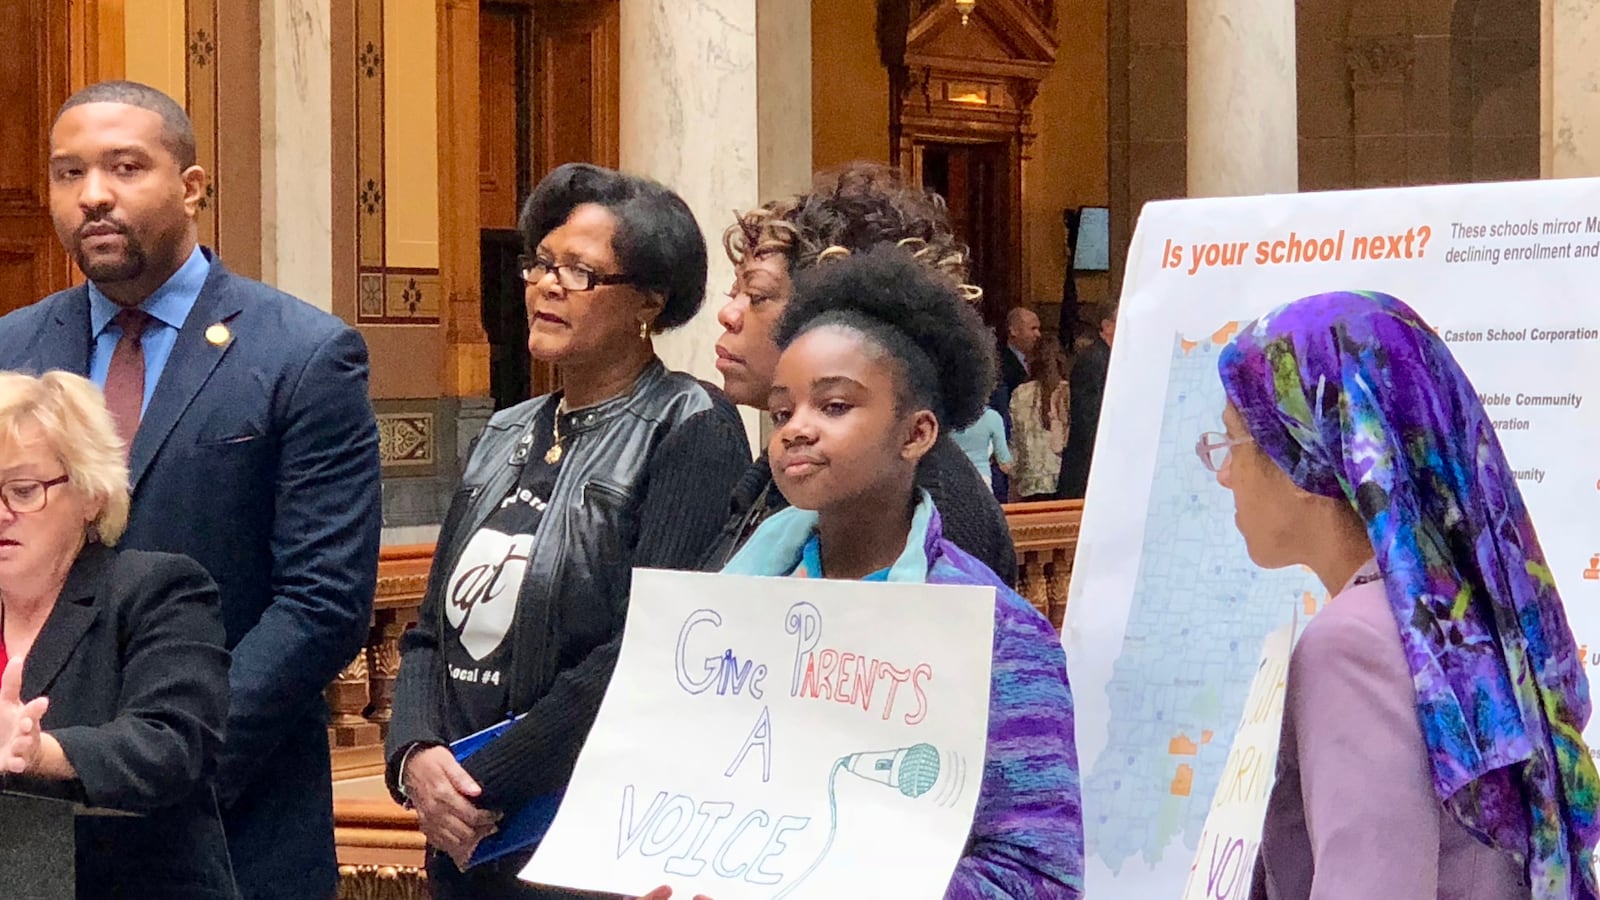 Students hold signs against a bill in the legislature that would allow a state takeover of the Gary and Muncie school districts.